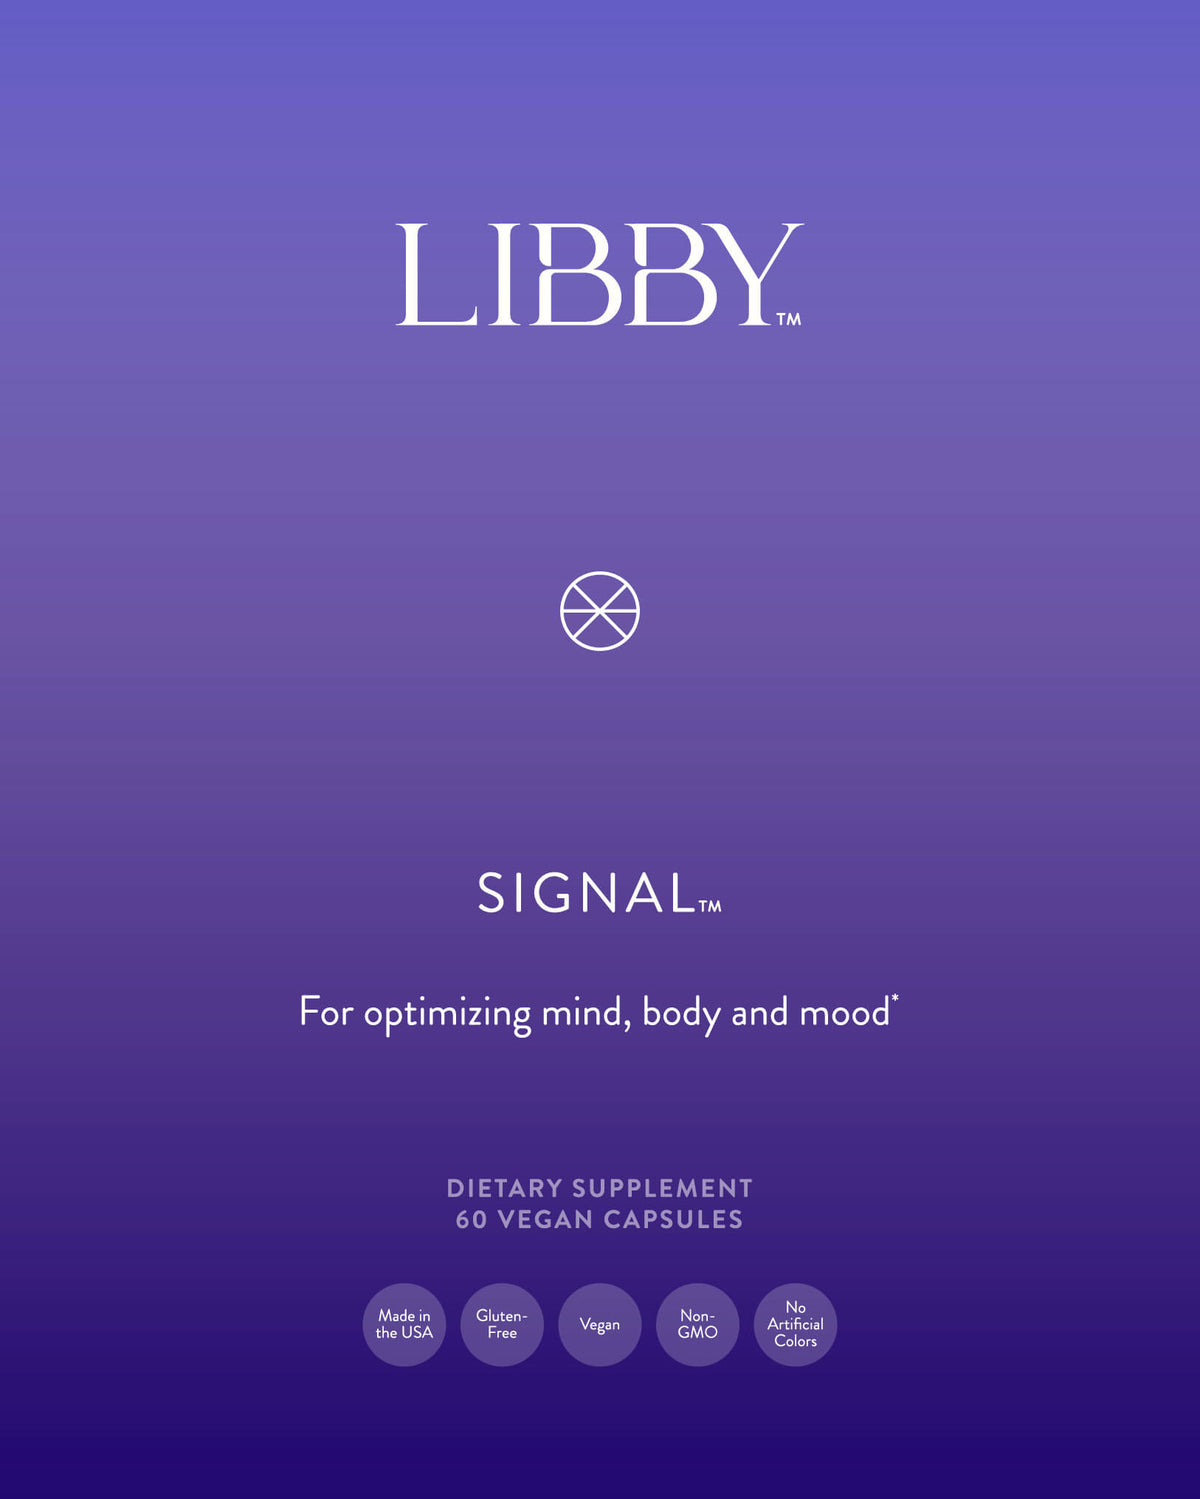 Signal supplement from Libby for optimizing mind, body and mood. Bottle label.